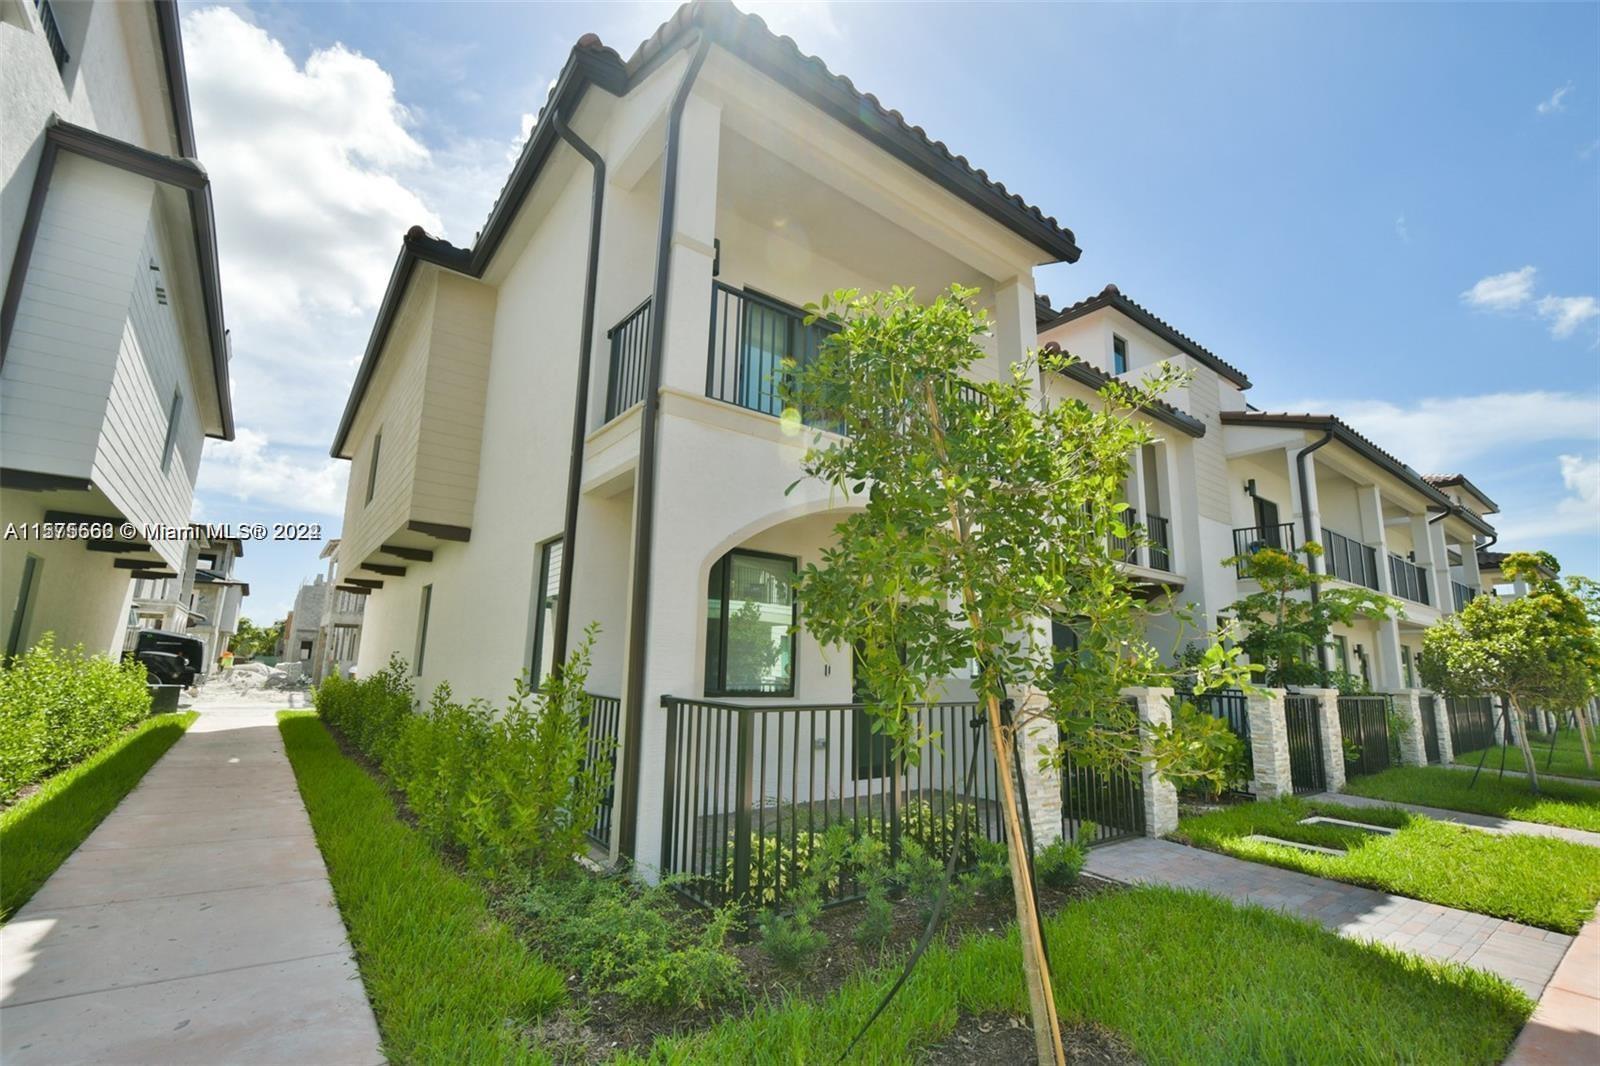 View Doral, FL 33166 townhome